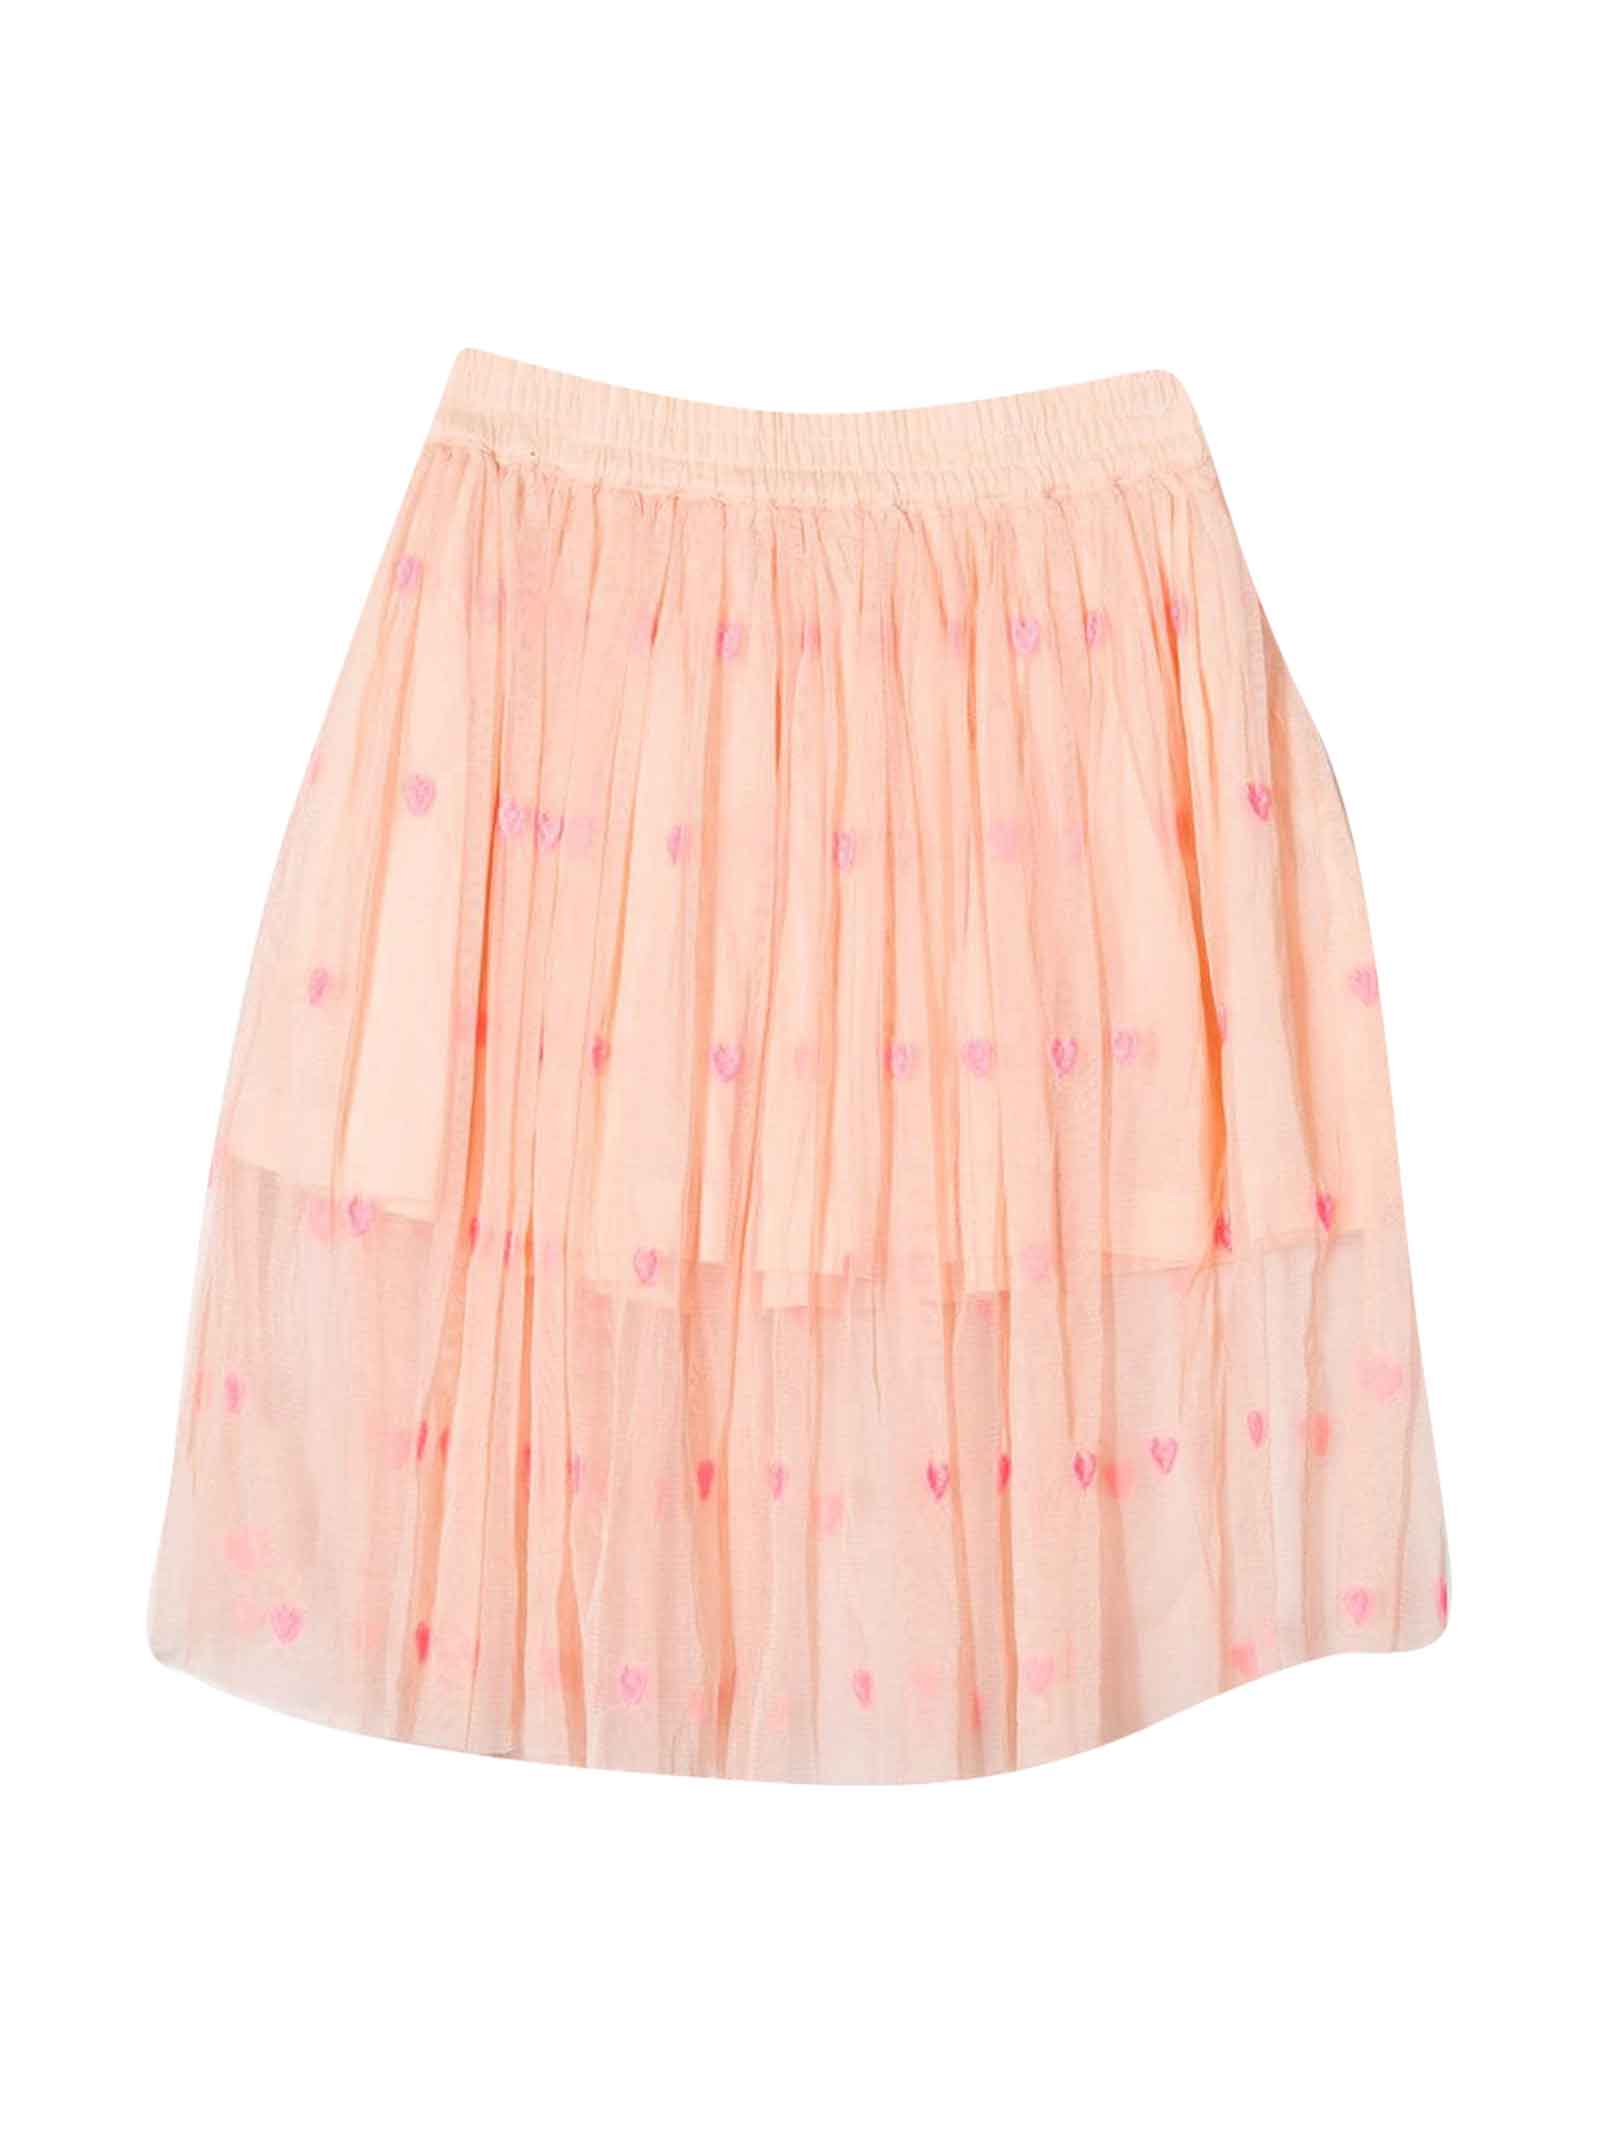 STELLA MCCARTNEY PINK SKIRT WITH EMBROIDERY,11260983